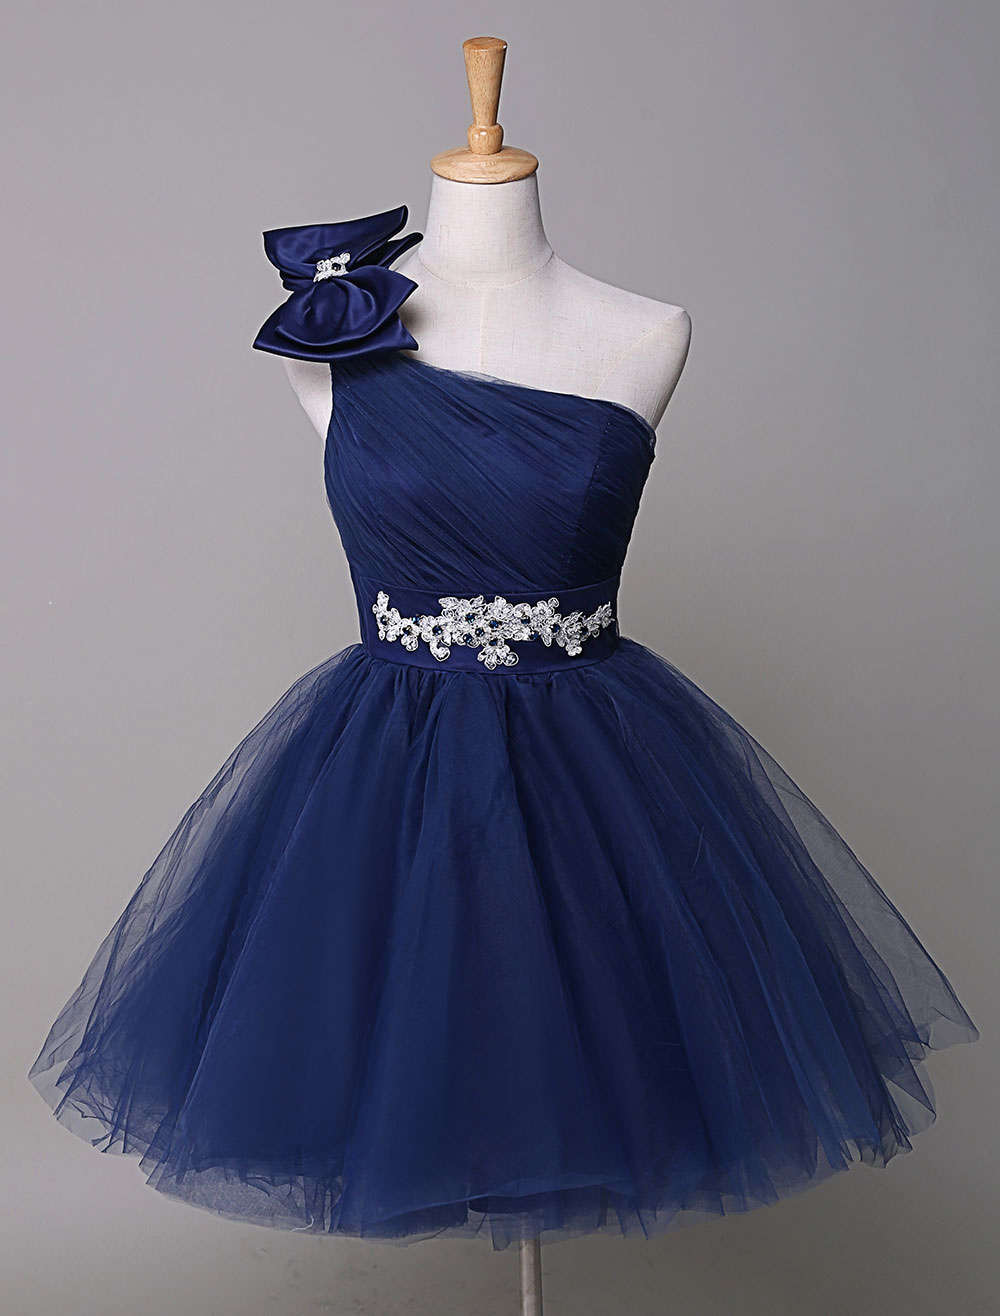 One Shoulder Prom Dress Royal Blue Tulle Homecoming Dress Beading Bow Mini Party Dress (Wedding Cheap Party Dress) photo